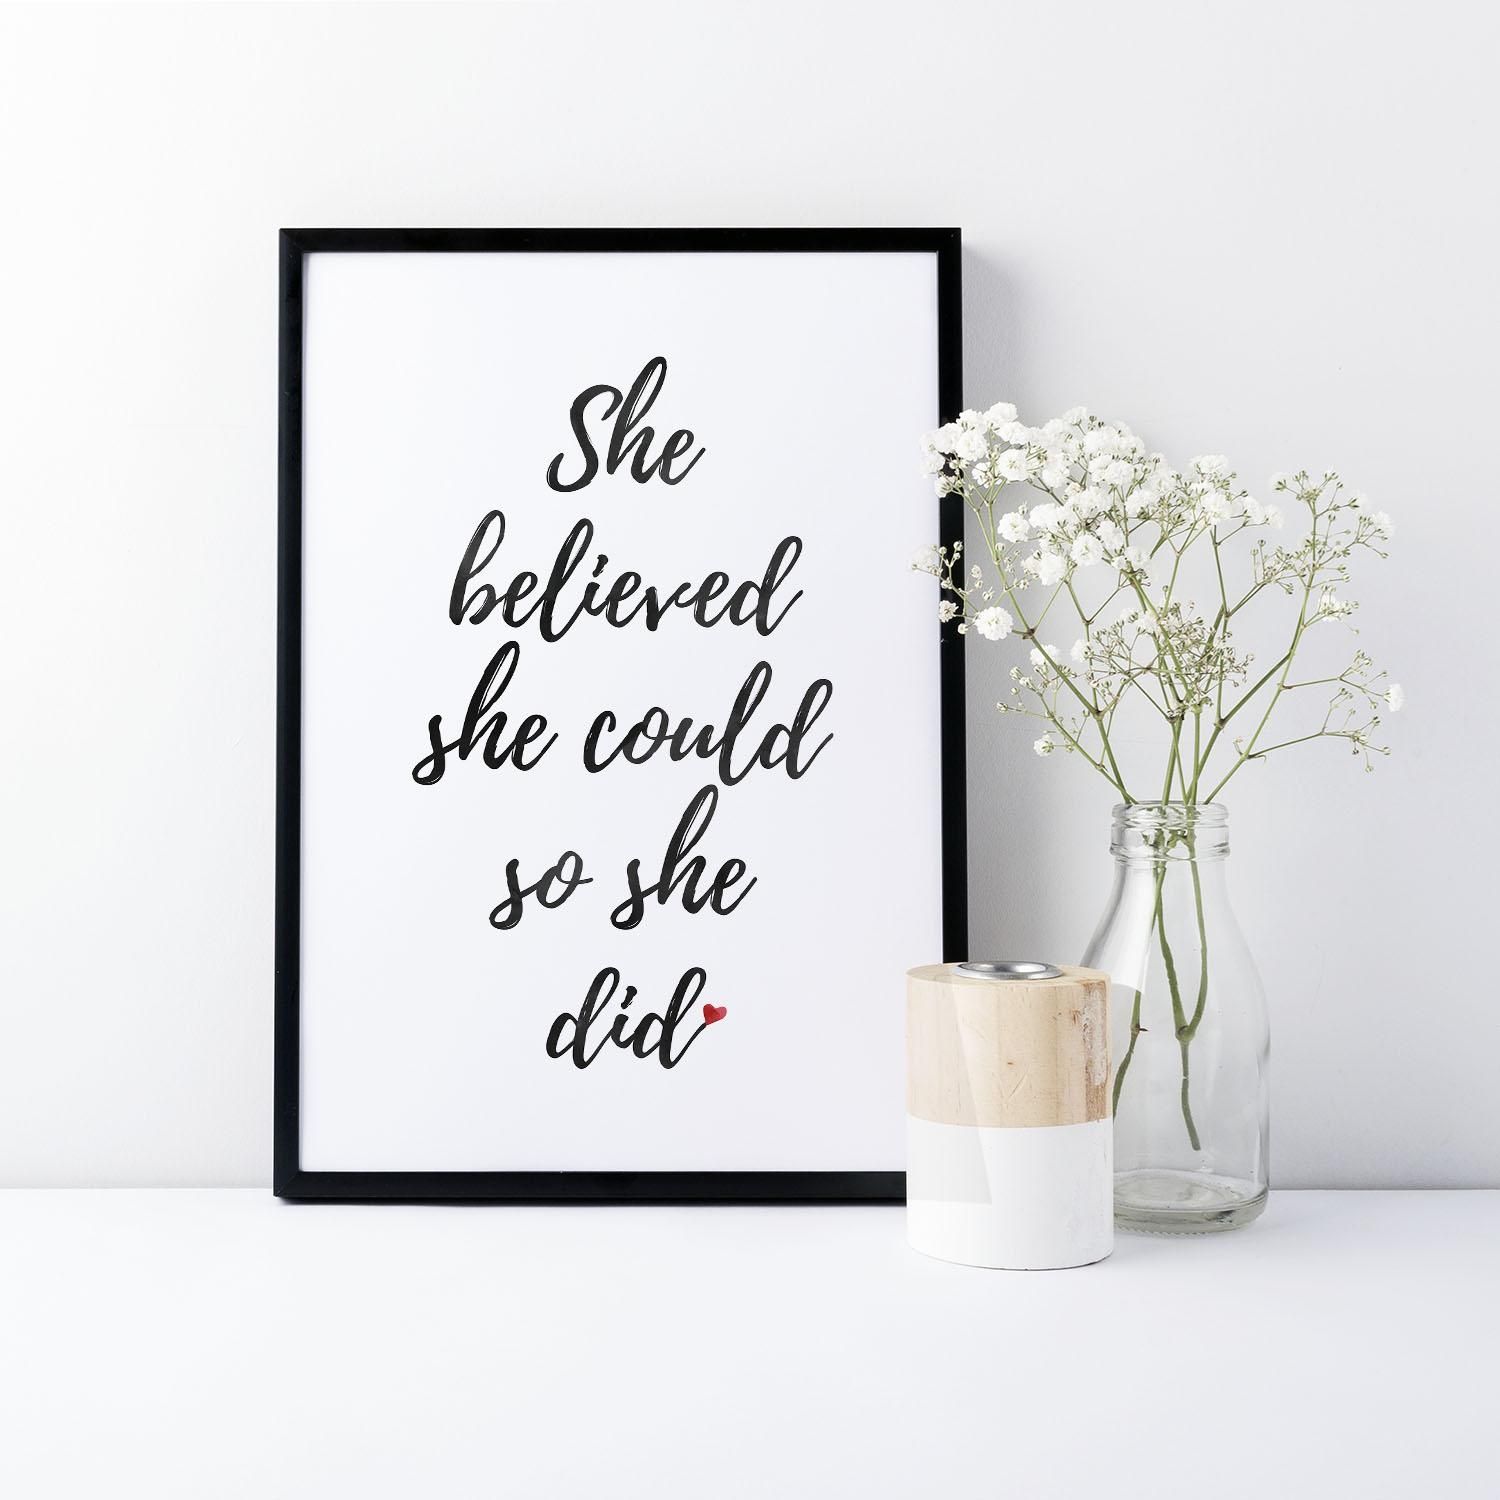 She Believed She Could So She Did' Quote Print Wall Art – Devon Inside She Believed She Could So She Did Wall Art (View 3 of 20)